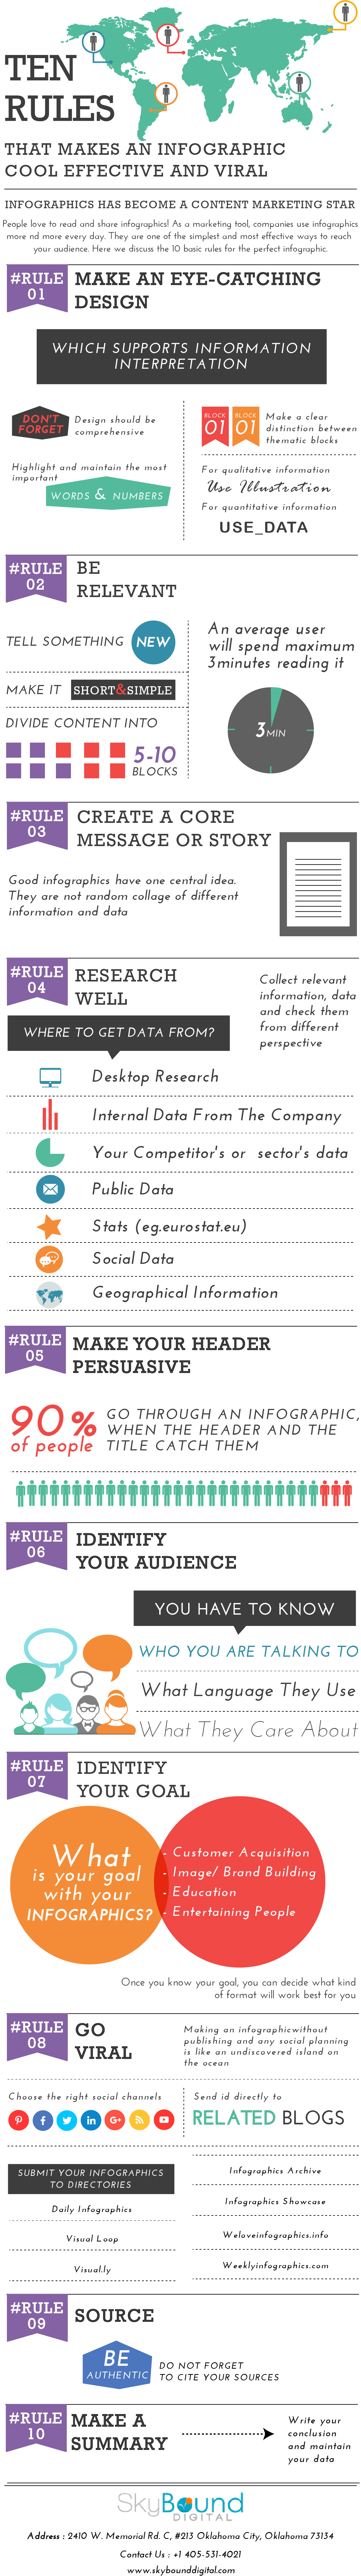 Ten Rules That Makes An Infographic Cool, Effective, and Viral